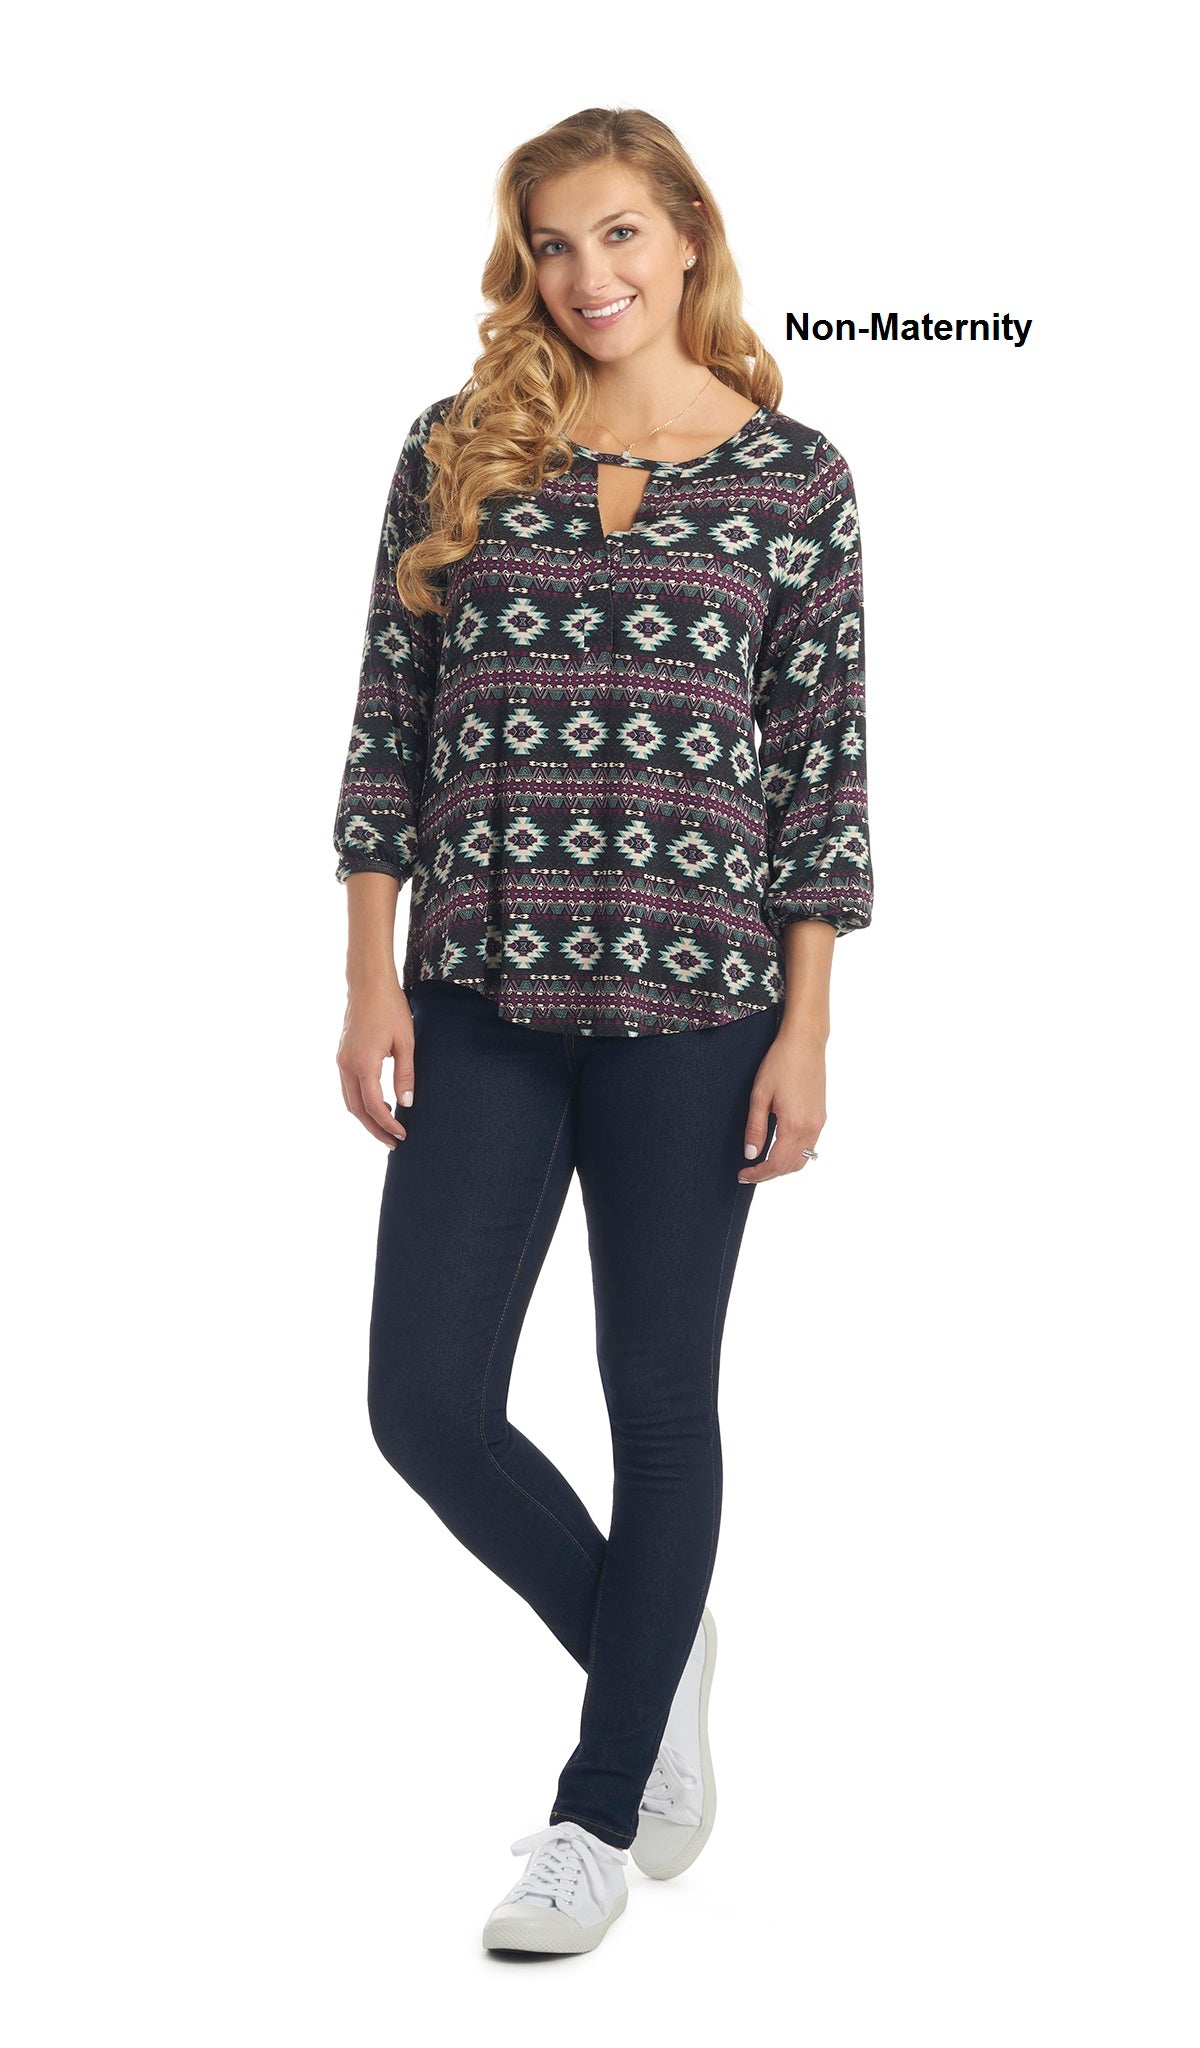 Aztec Purple Lila top worn by woman as non-maternity style with dark denim jeans..